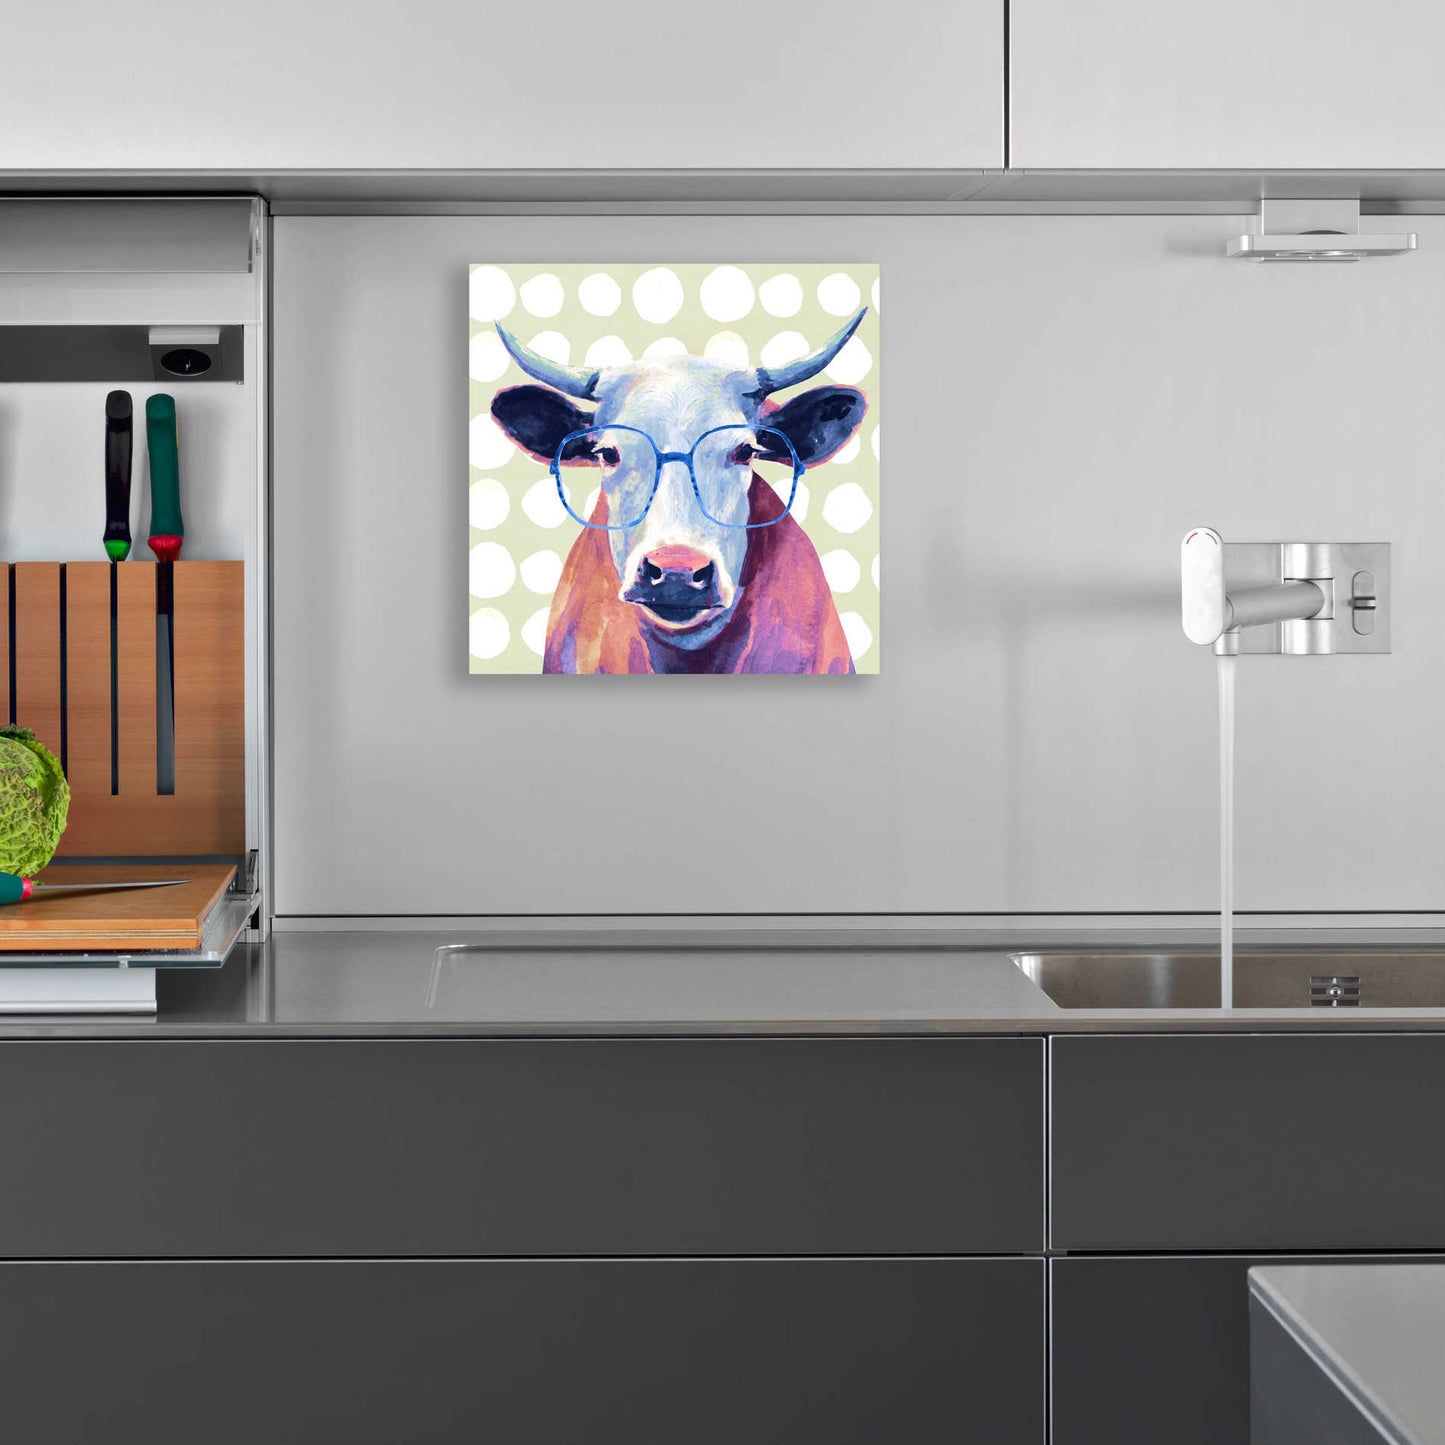 Epic Art 'Bespectacled Bovine II' by Victoria Borges, Acrylic Glass Wall Art,12x12